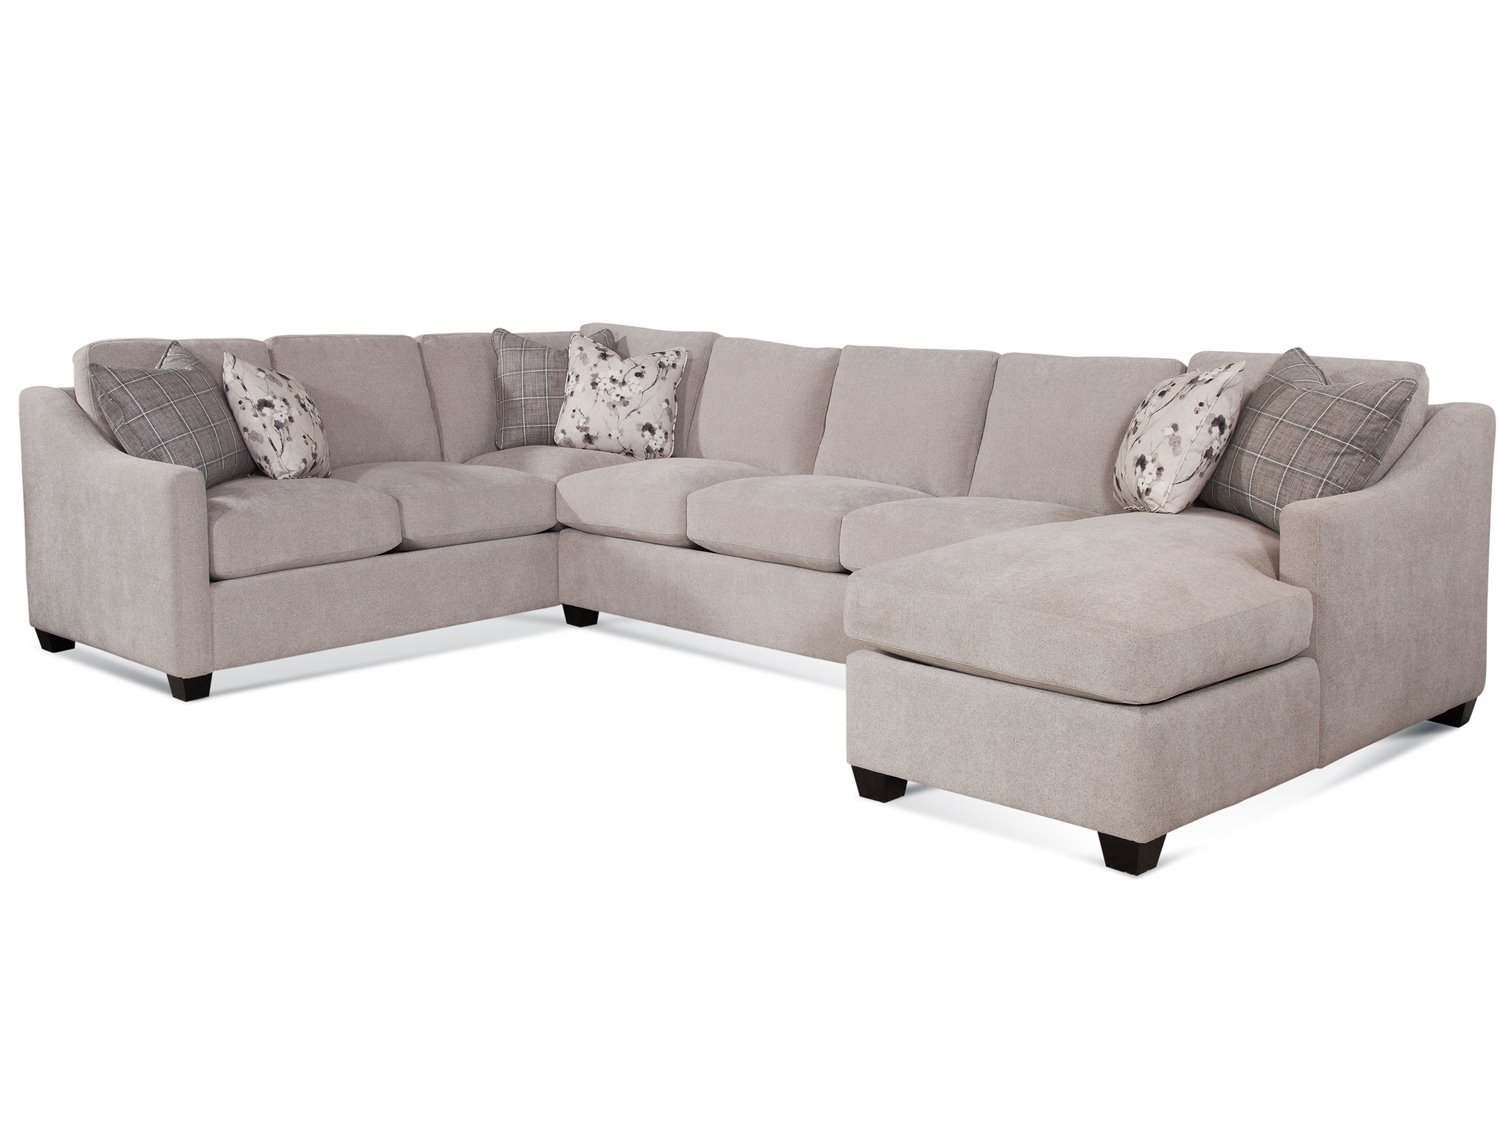 Braxton Culler Oliver Sectional Sofa